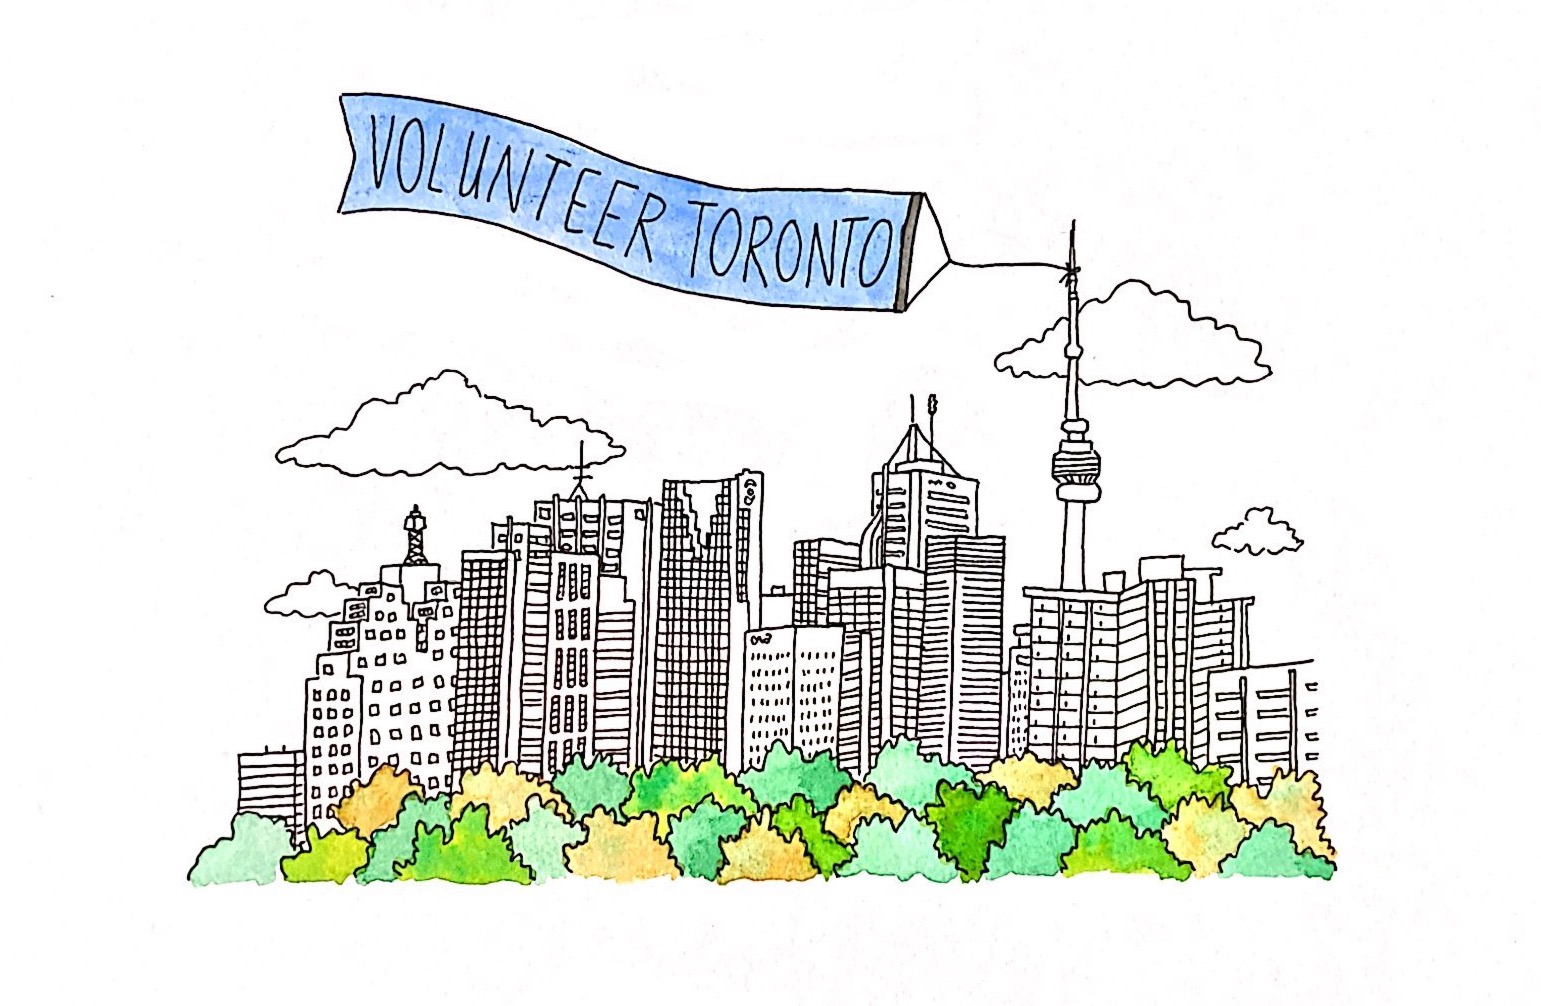 A hand-drawn image of the Toronto skyline, with a banner reading "Volunteer toronto" flying from the CN Tower